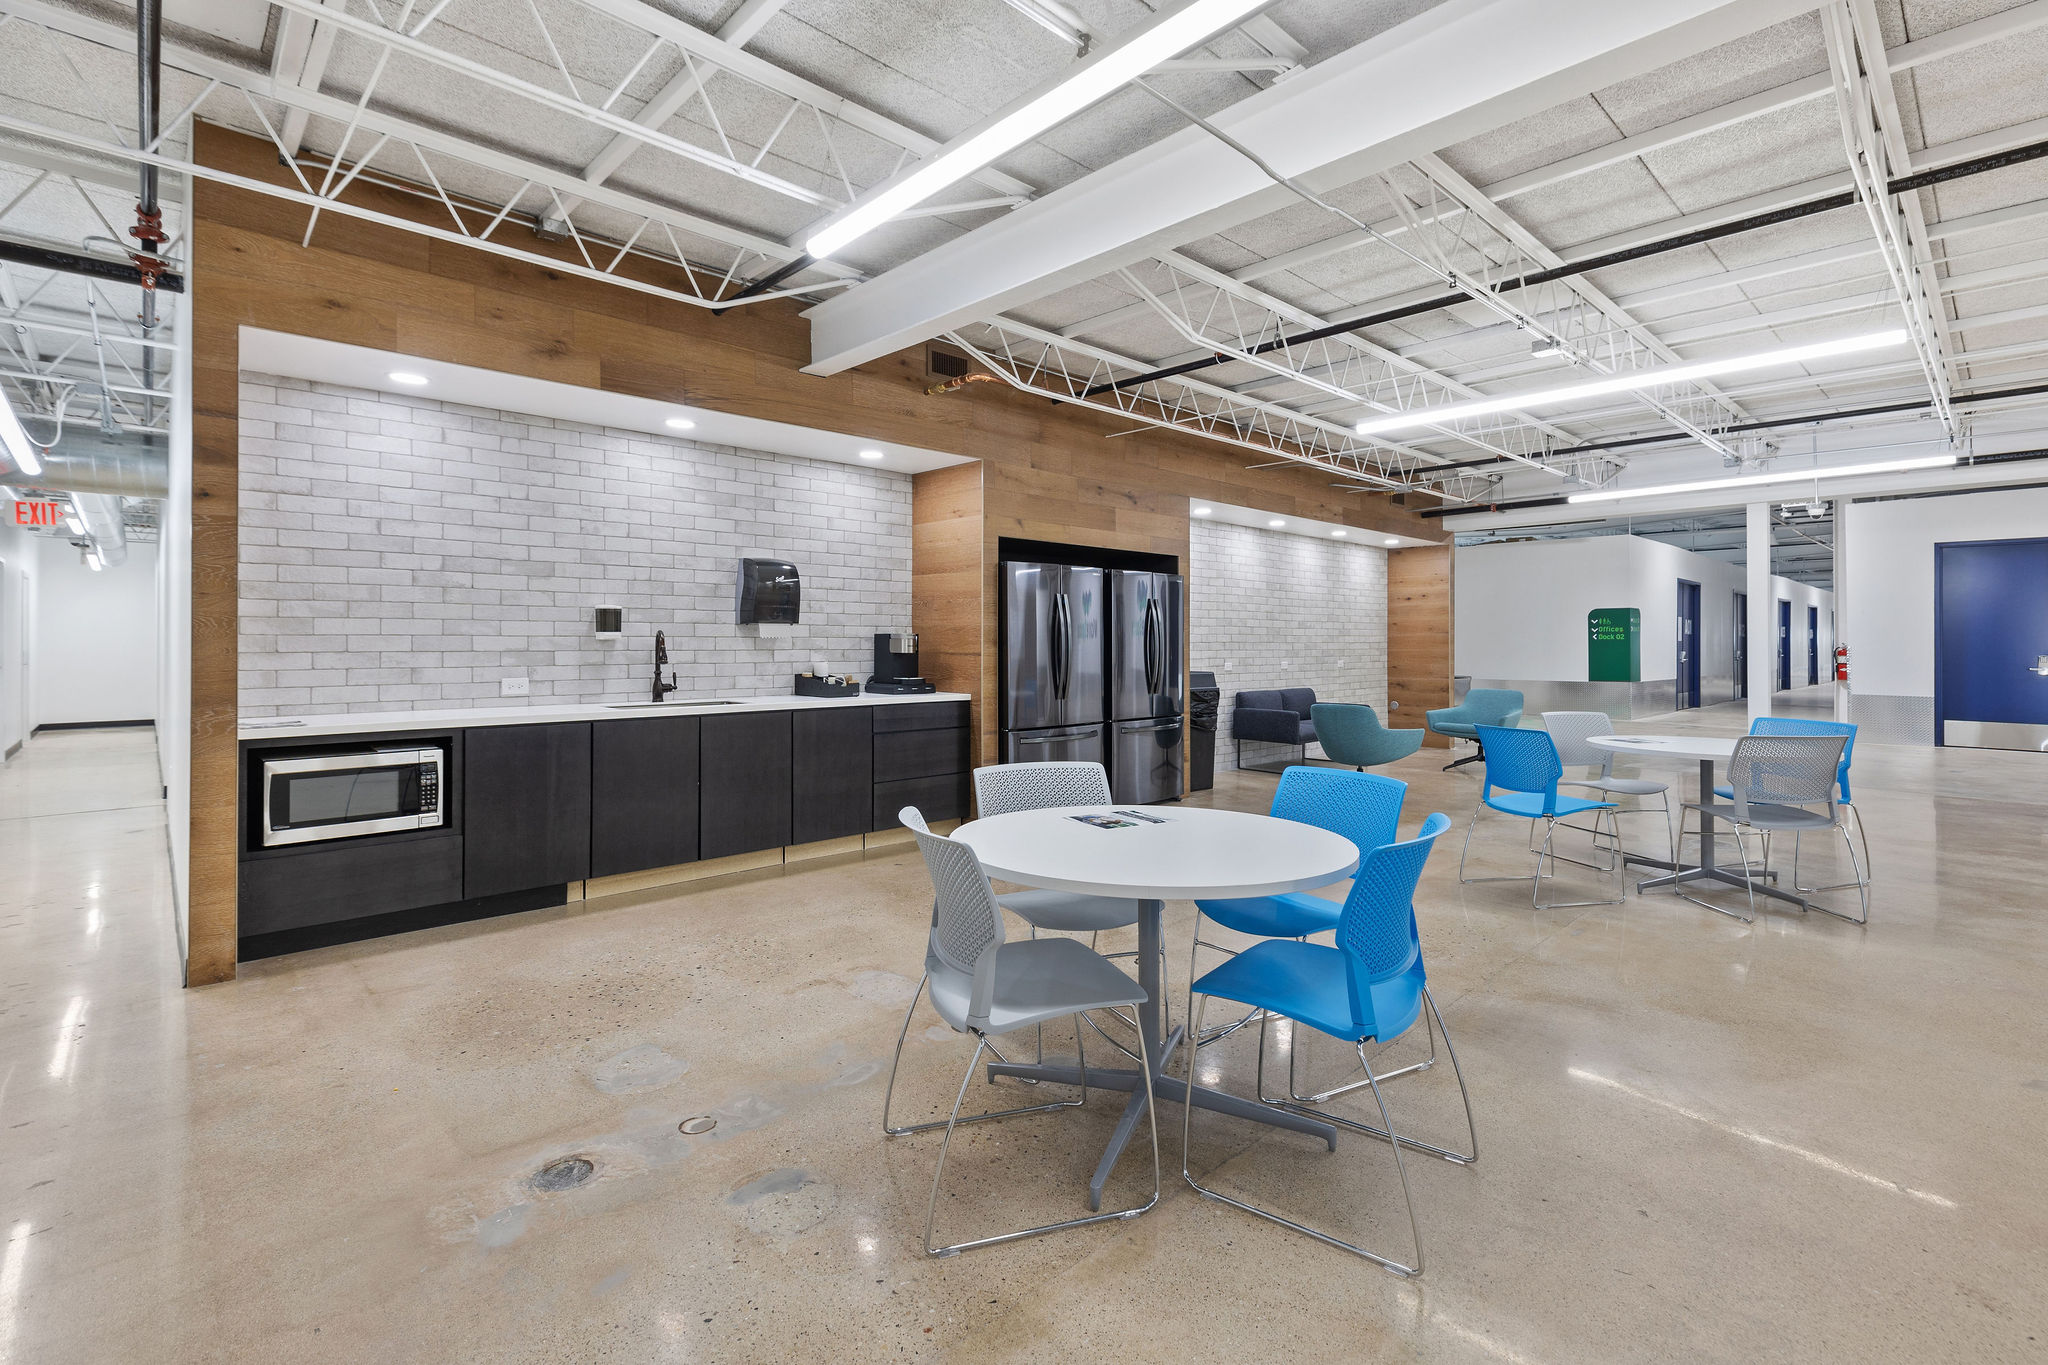 Chicago Il Wheeling Shared Warehouse Space Kitchen Area